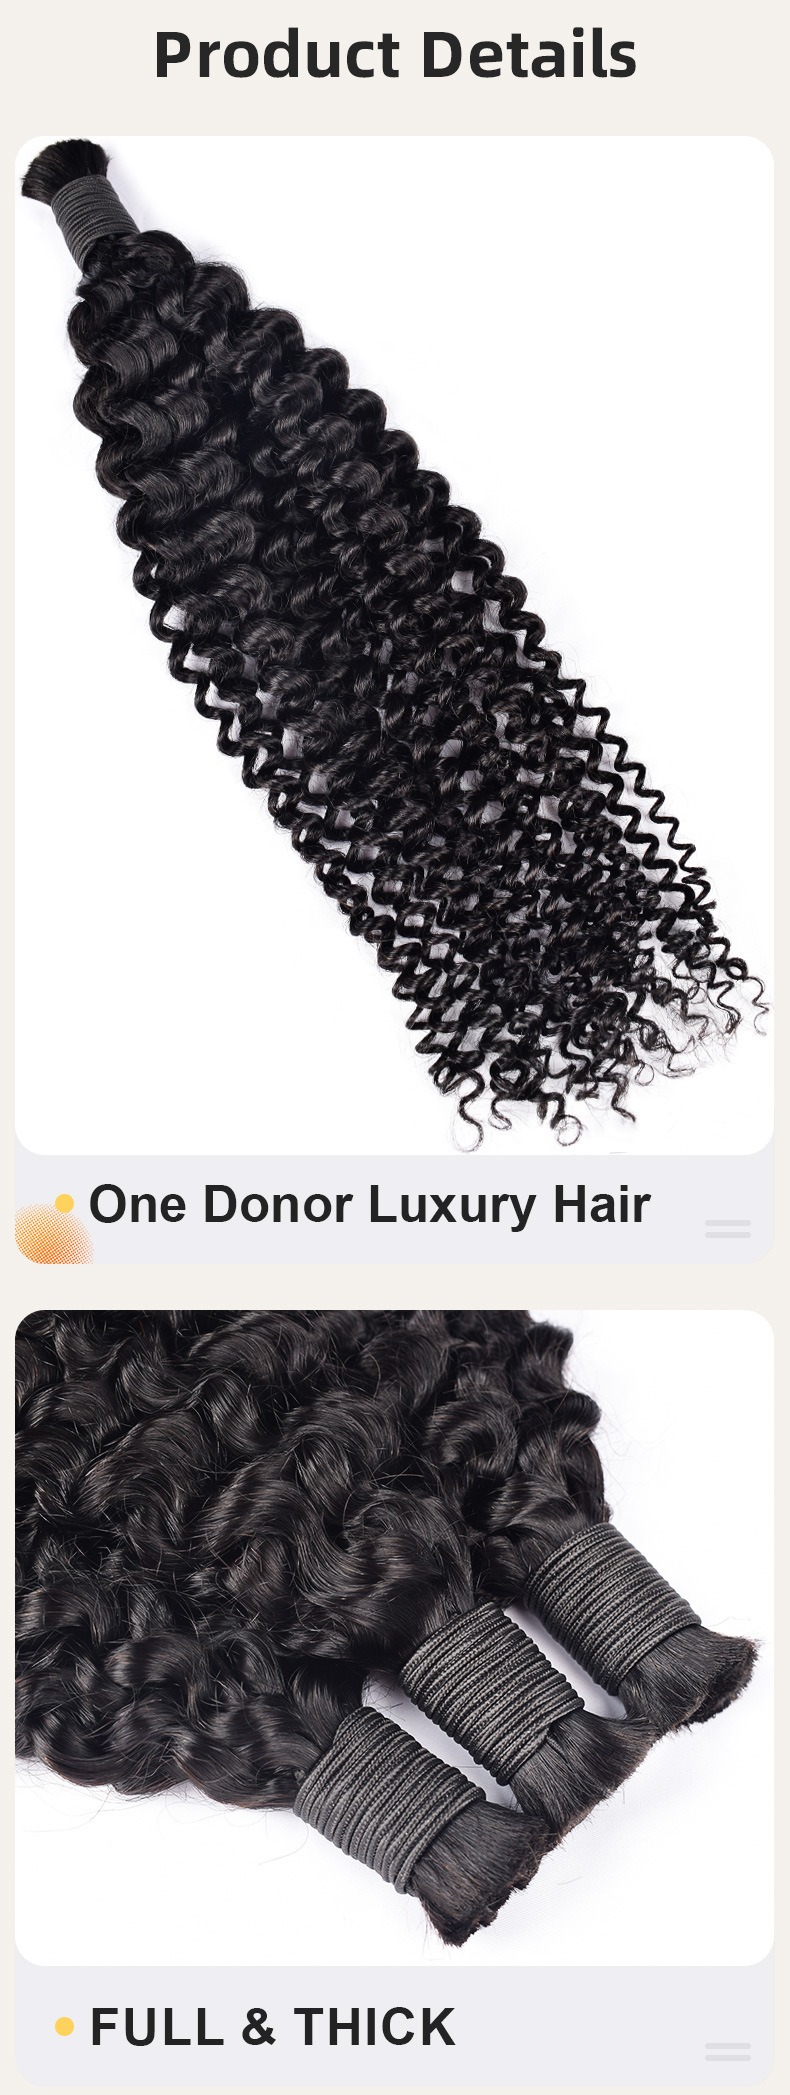 Get natural-looking bouncy waves with these genuine human hair bulk hair extensions, enhancing your hair's texture